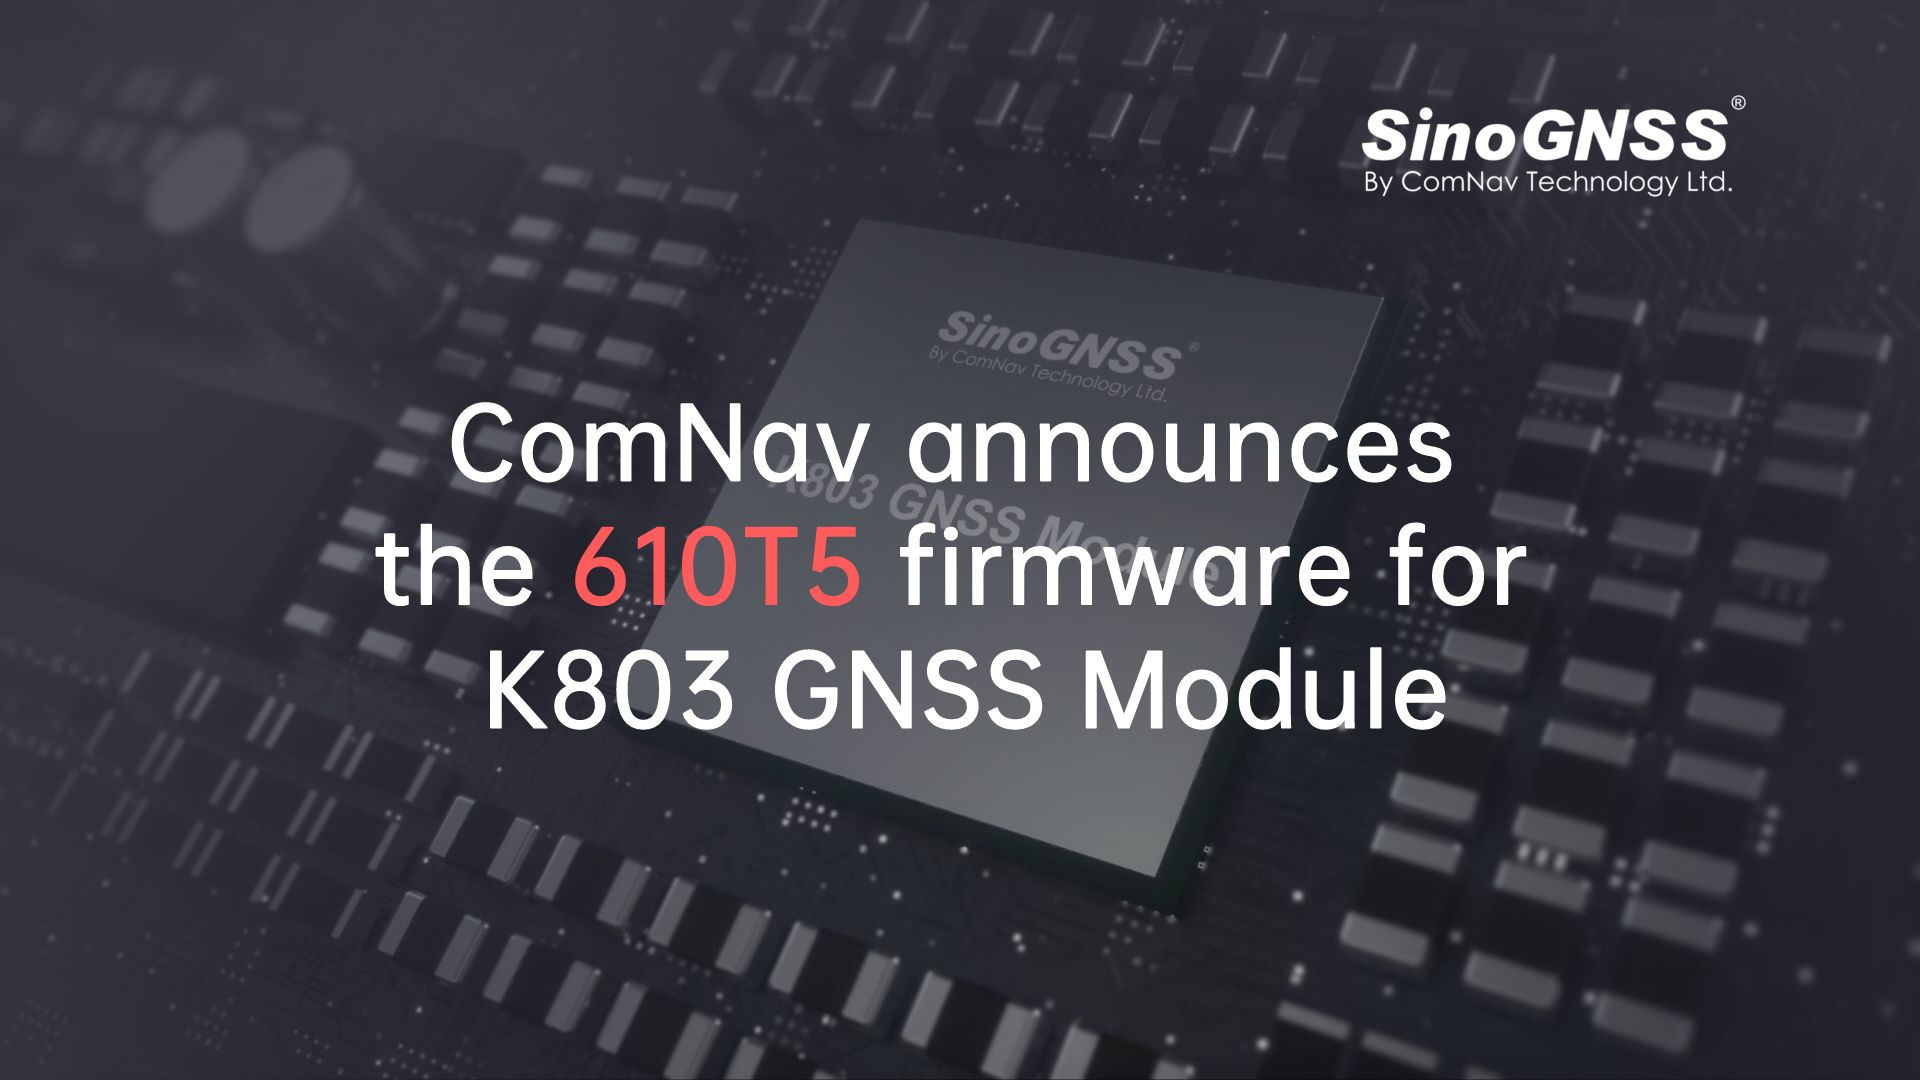 ComNav's latest 610T5 brings the enhanced reliability in ionospheric environment and greater functionality